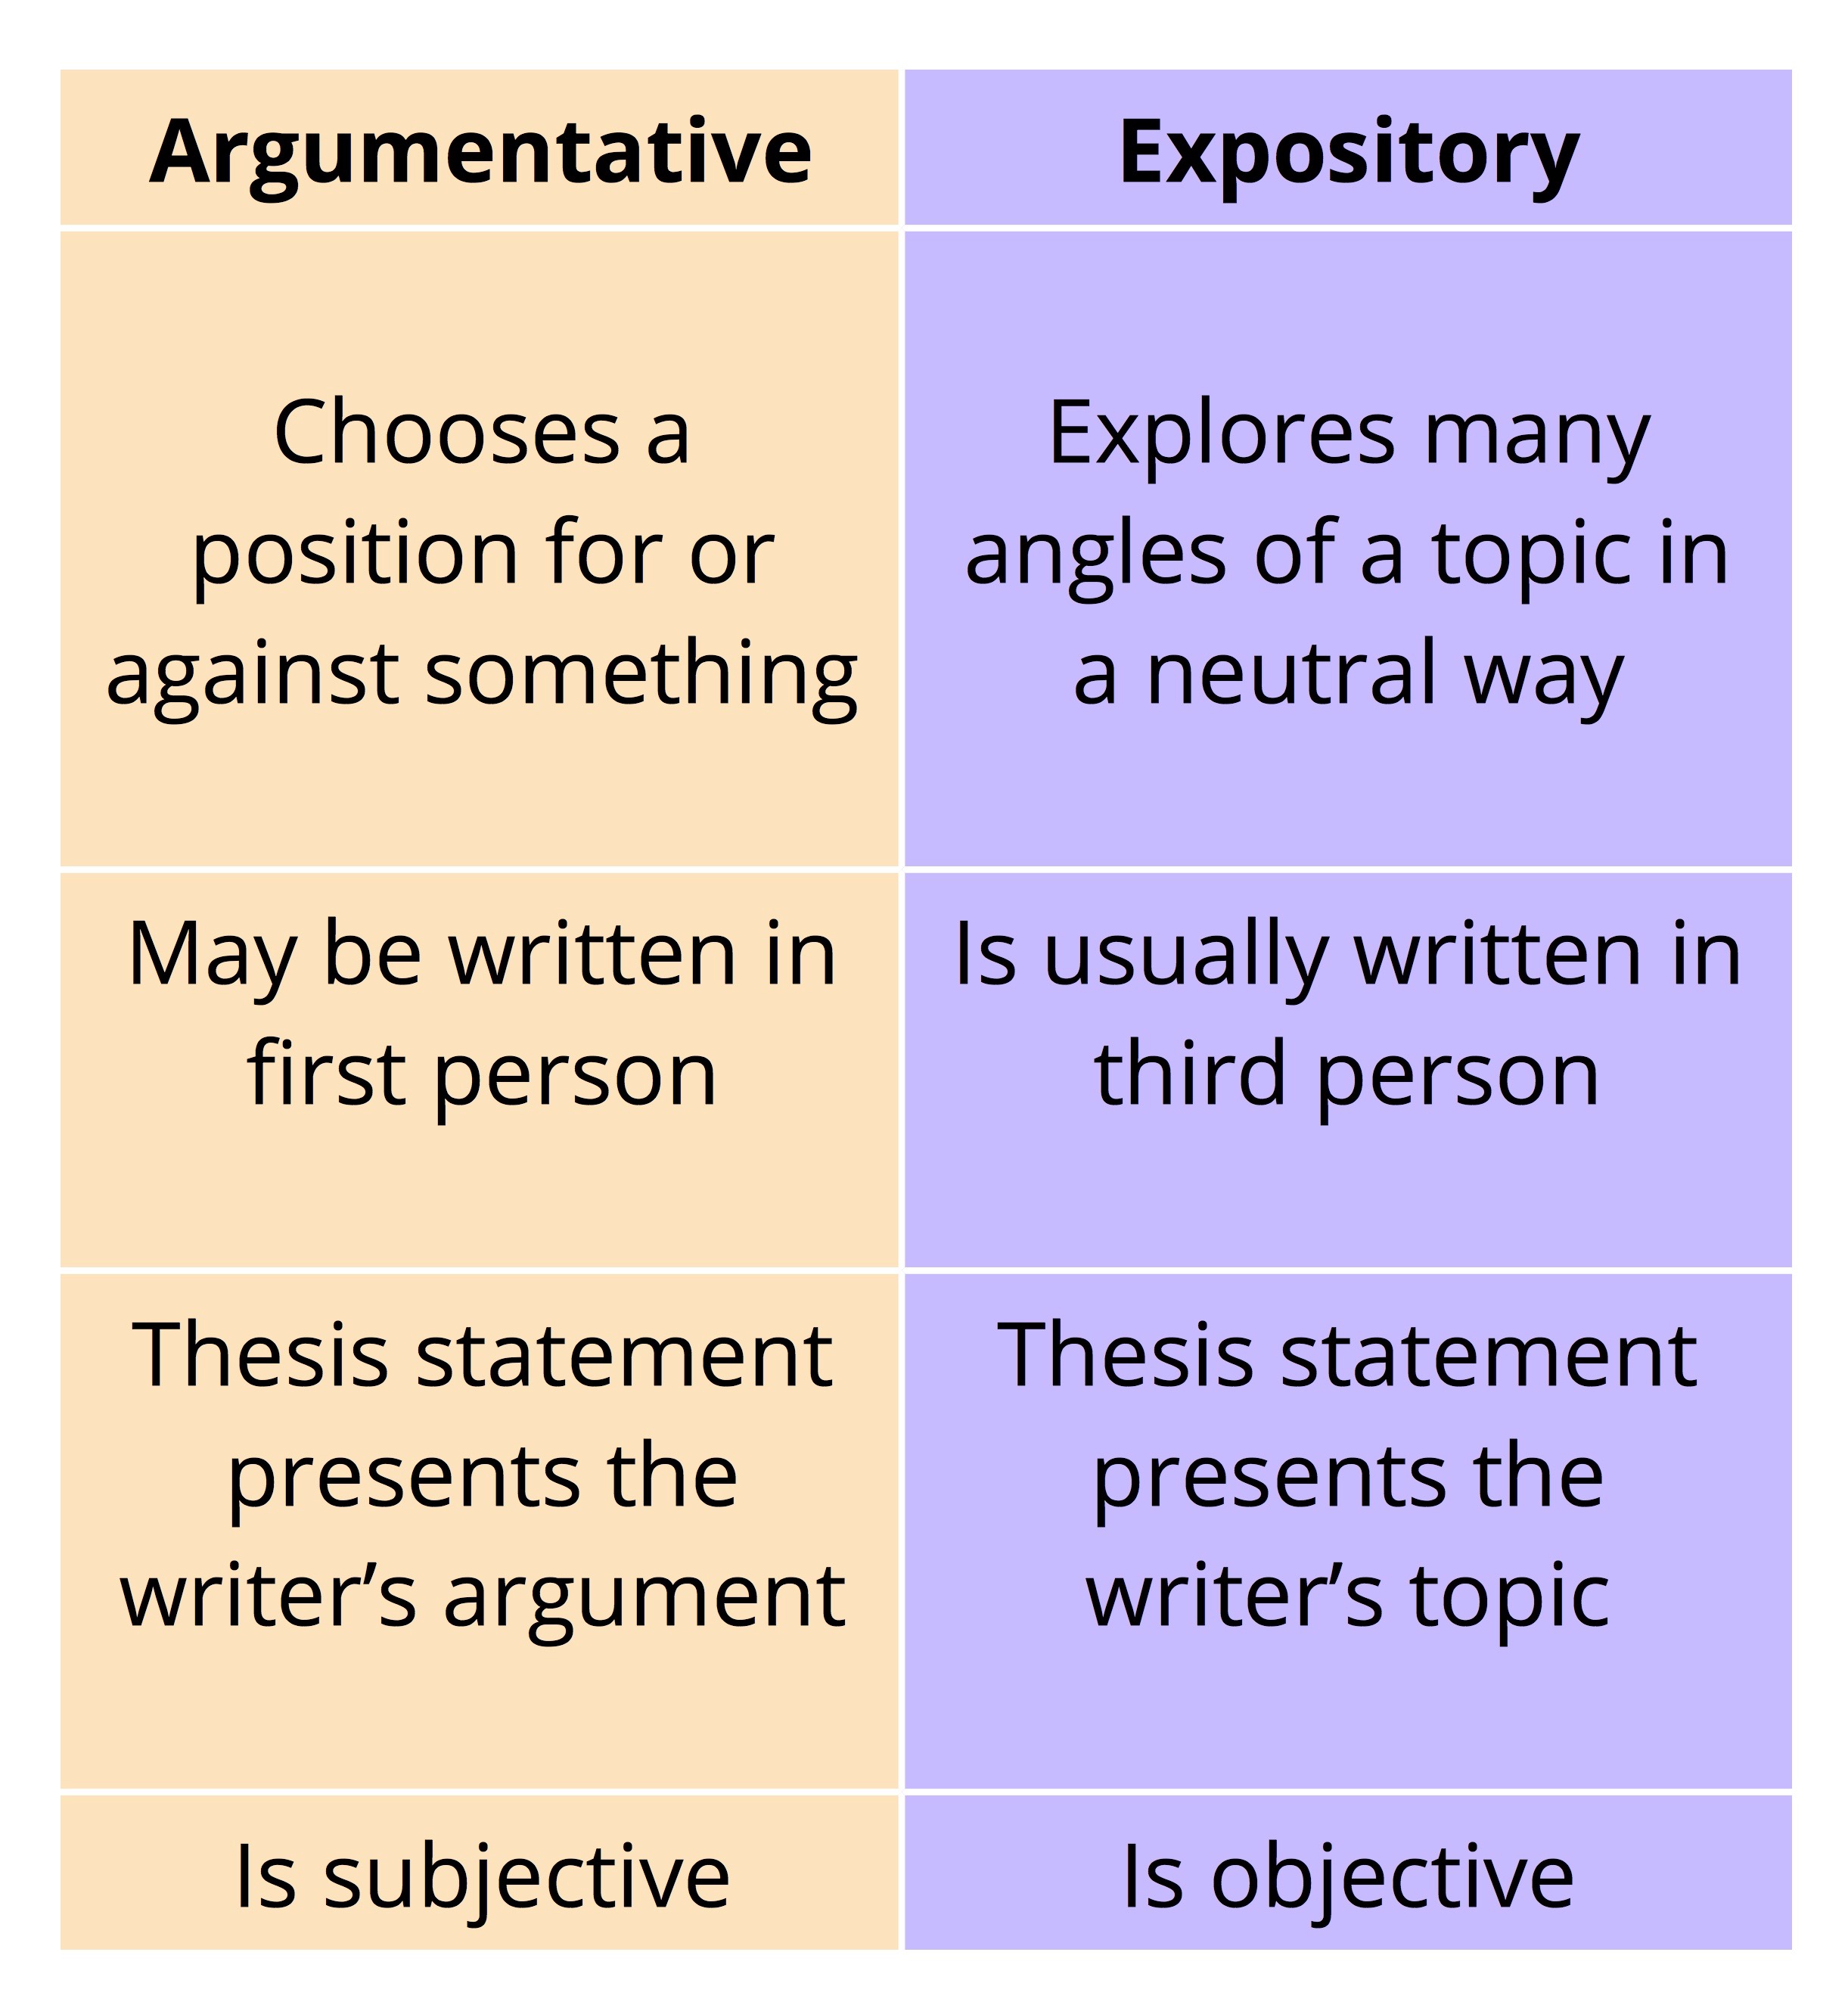 thesis statement for persuasive essay